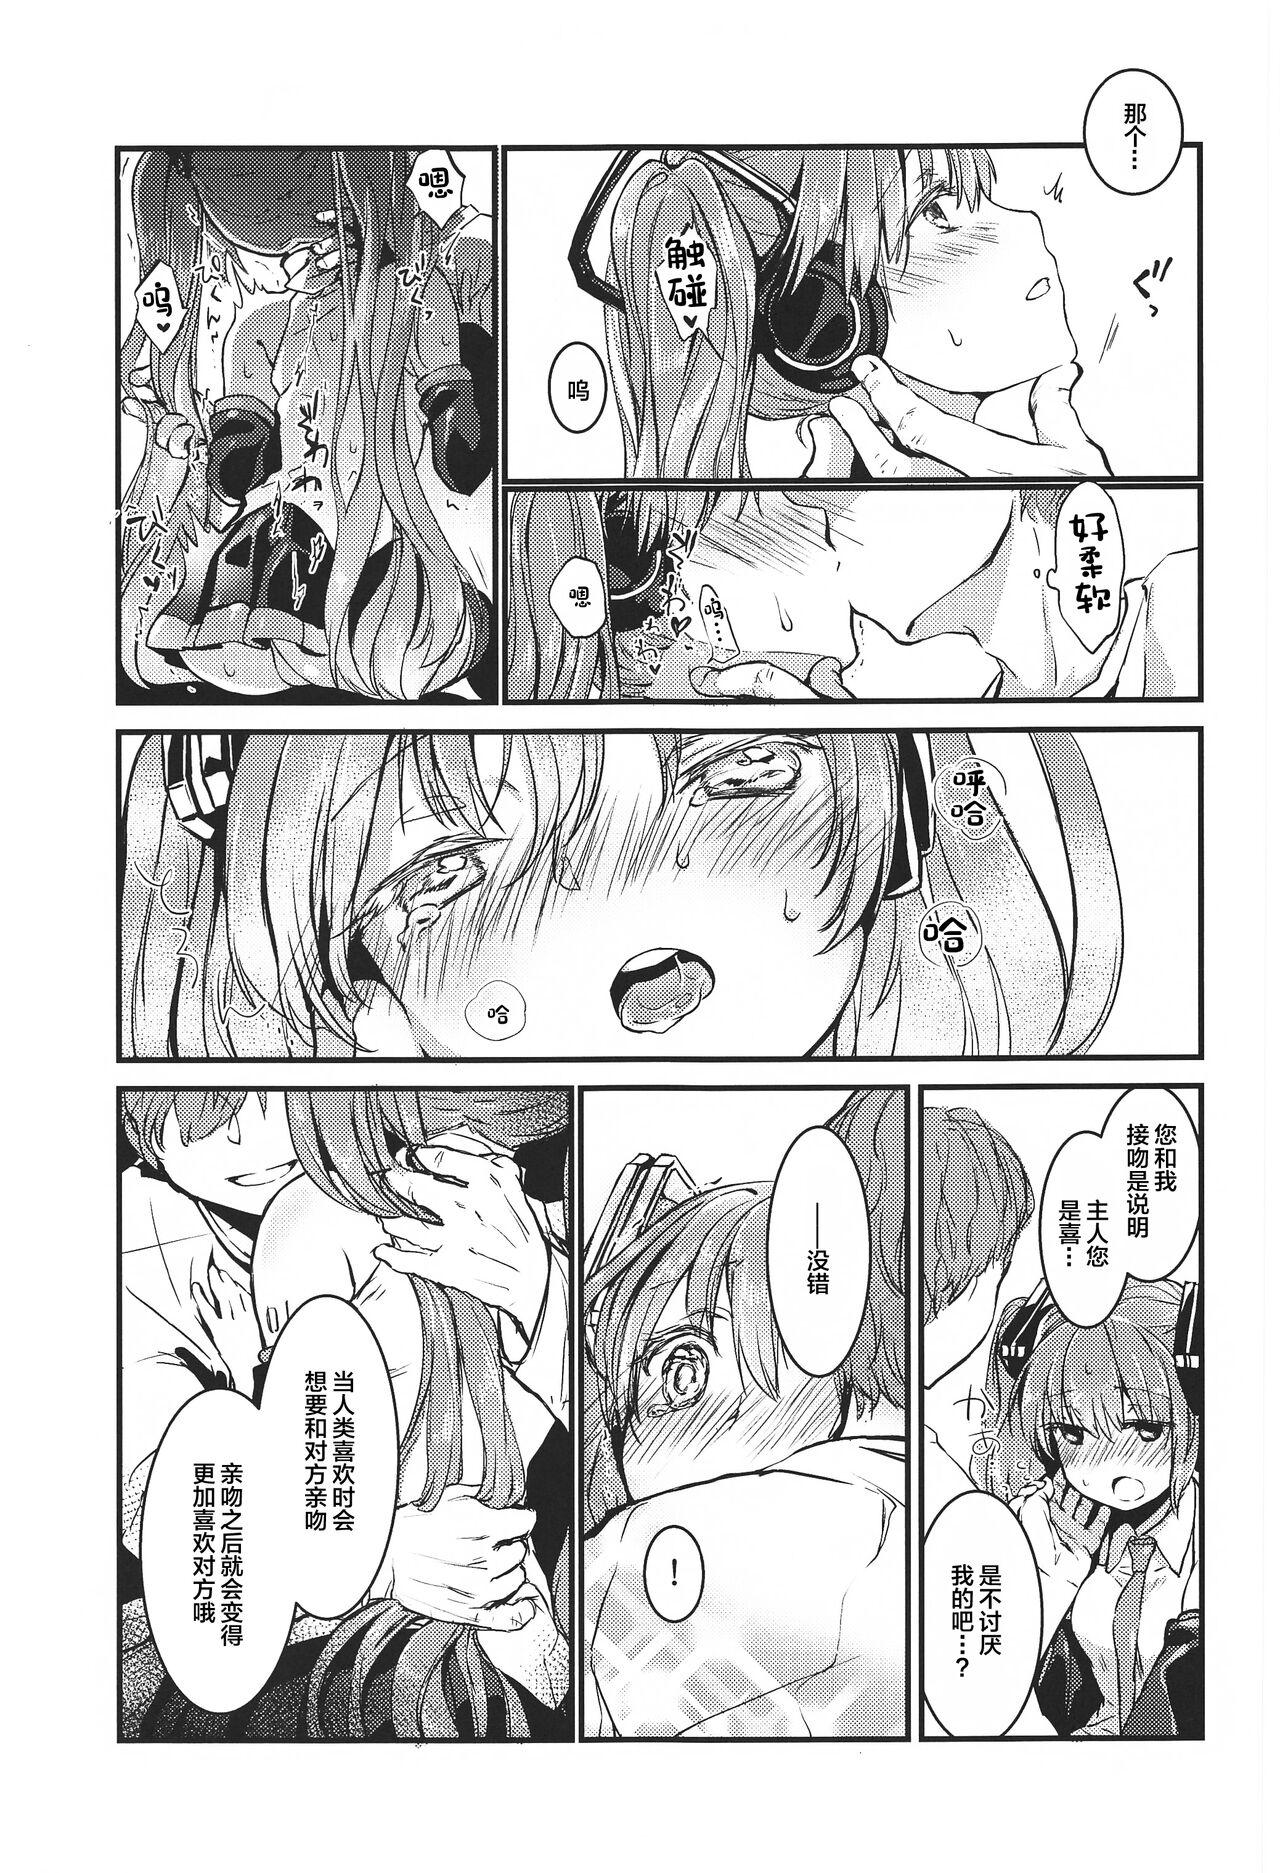 Stripping Moumoku Switch - Vocaloid Amatoriale - Page 4